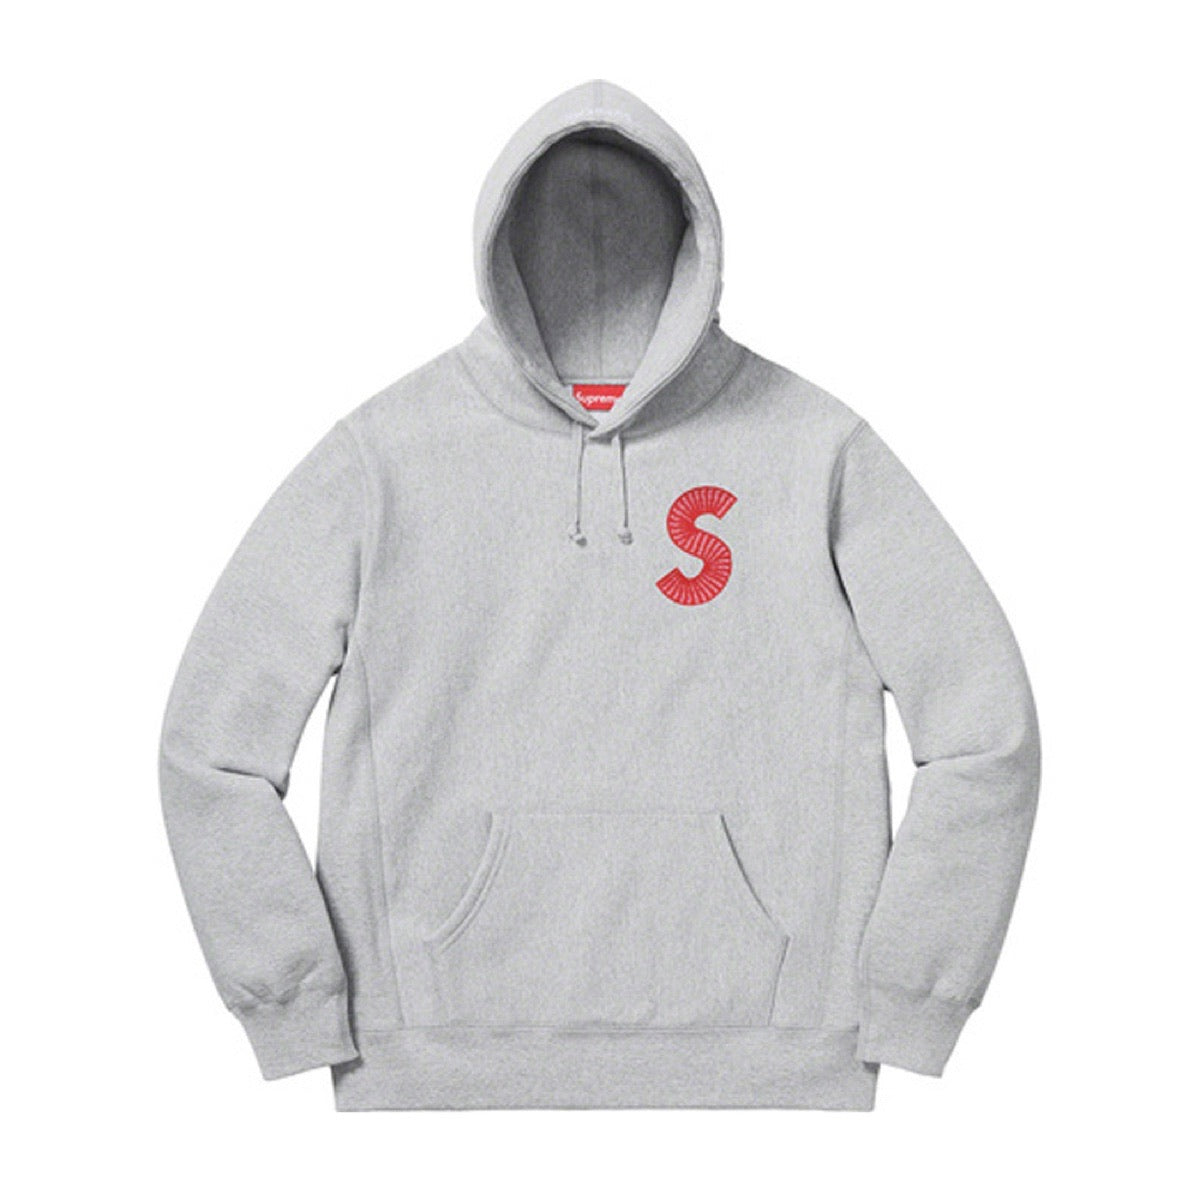 Supreme S logo hooded sweatshirt Grey/Red – Centrall Online